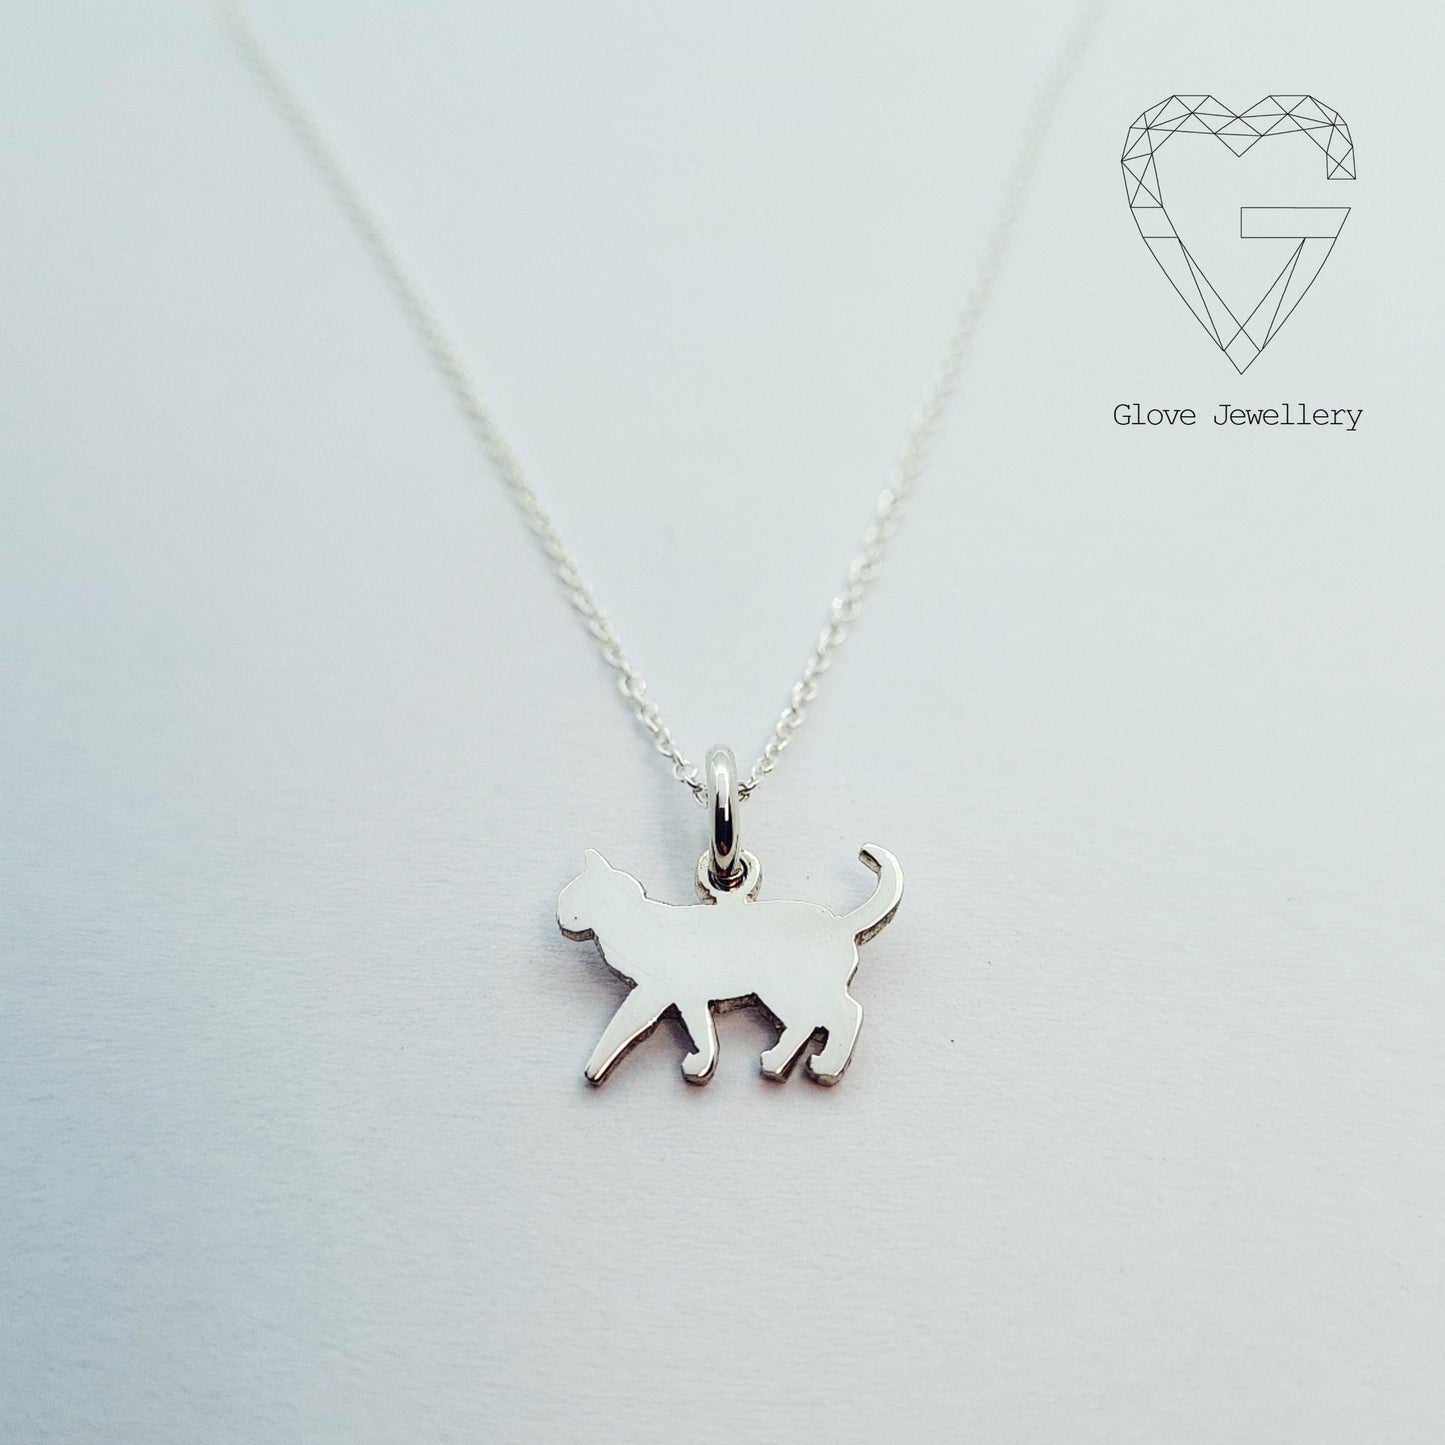 Handcrafted sterling silver Kitty cat pendant with chain.